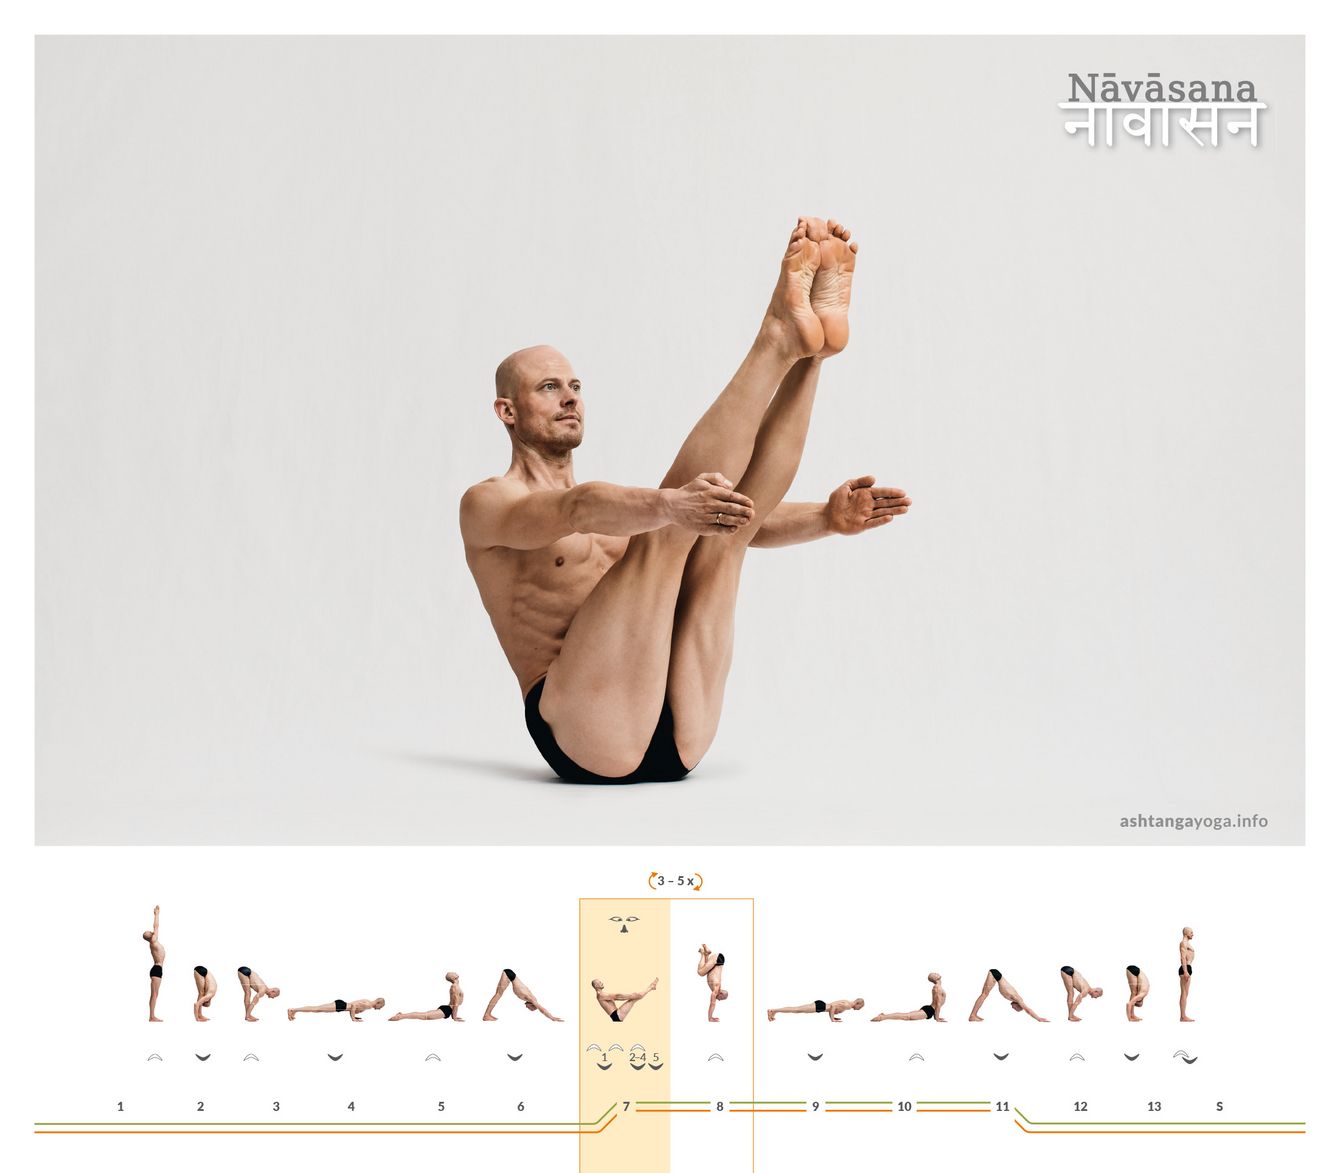 Tummee.com - It's Friday Flow Time!! Learn and teach your students about Boat  Pose Crossed Ankles Mountain Pose Crossed Ankles Flow at  https://www.tummee.com/yoga-poses/boat-pose-crossed-ankles-mountain-pose-crossed-ankles-flow  Level: Beginner Position ...